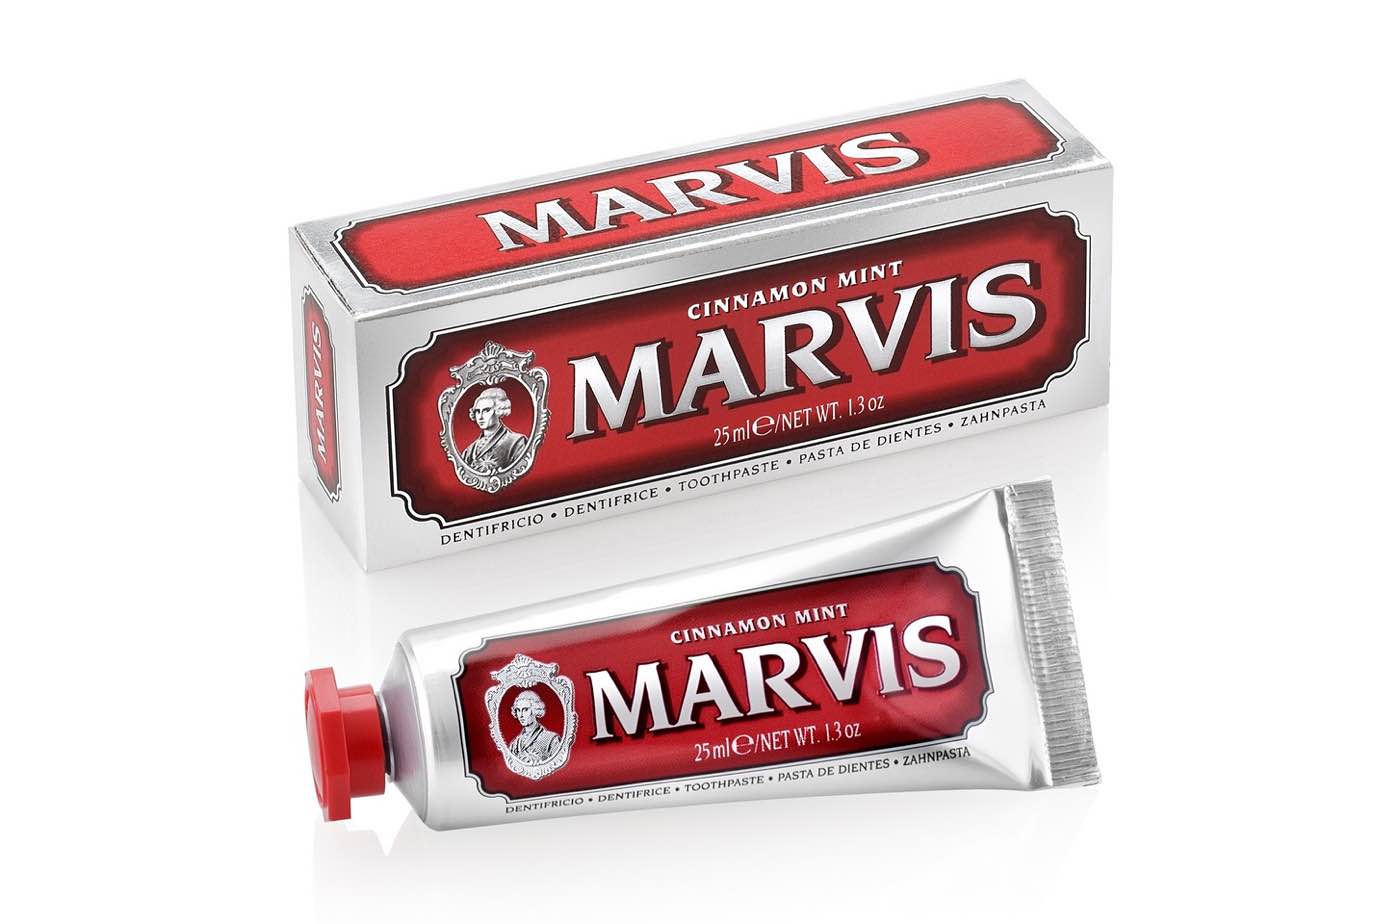 Marvis' travel-sized cinnamon mint toothpaste. ($6 as an Amazon add-on item, or $11 for the [full-sized 3.8 oz. tube](http://www.amazon.com/dp/B004QAG7QQ?tag=toolsandtoys-20))